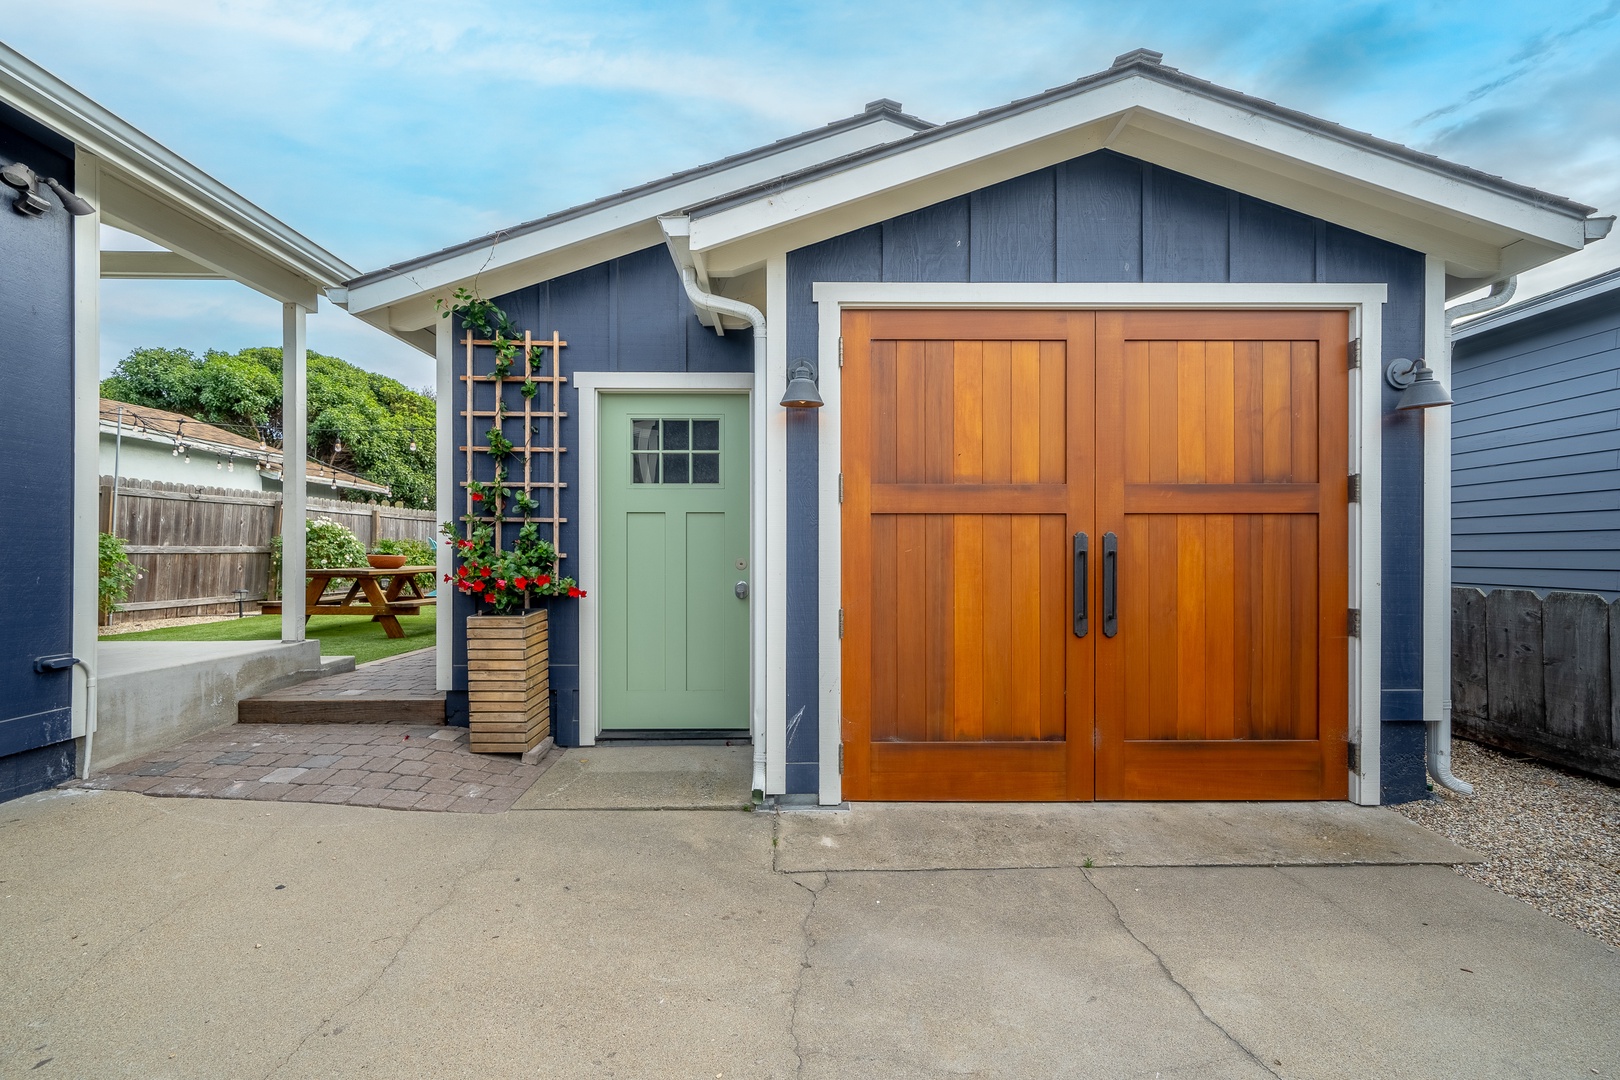 This charming home offers parking for up to 3 vehicles in the driveway